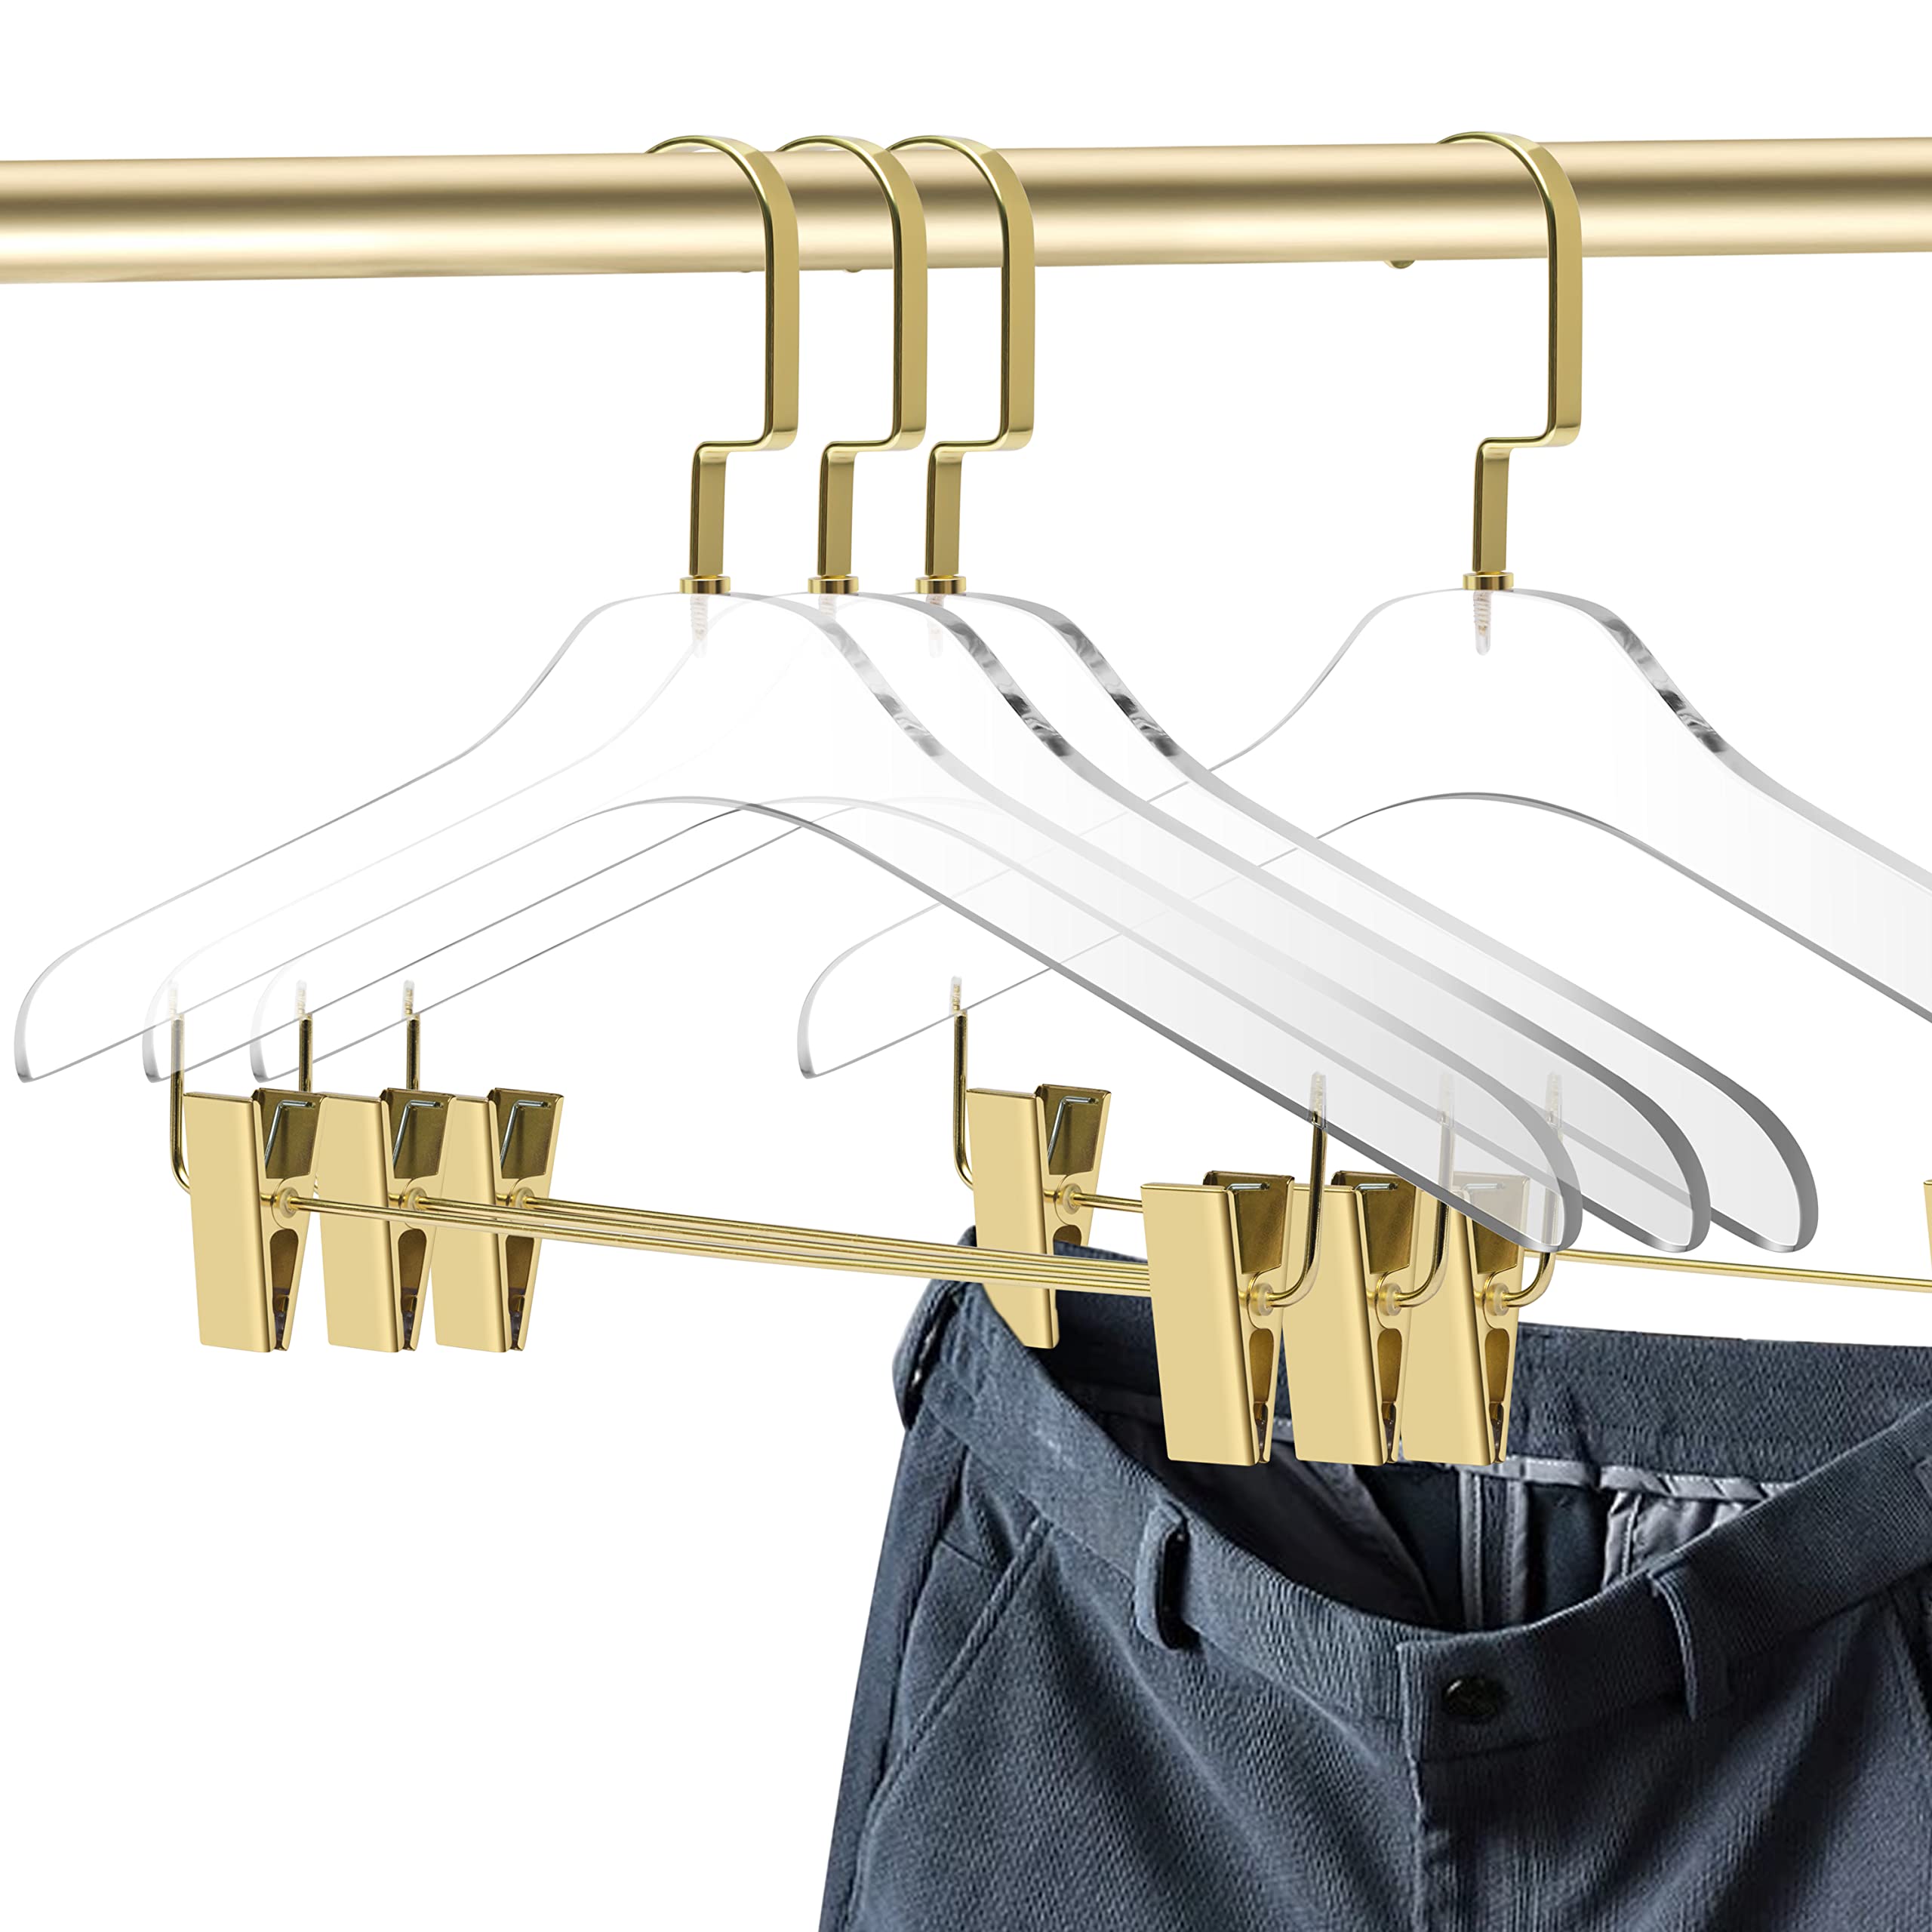 Quality Clear Acrylic Skirt Pant Hangers with Clips � 4 Pack, Stylish Clothes Hanger with Gold Hooks - Coat Hanger for Dress, Suit - Closet Organizer Adult Hangers - Cloth Hangers (Gold Hook, 4)  - Very Good